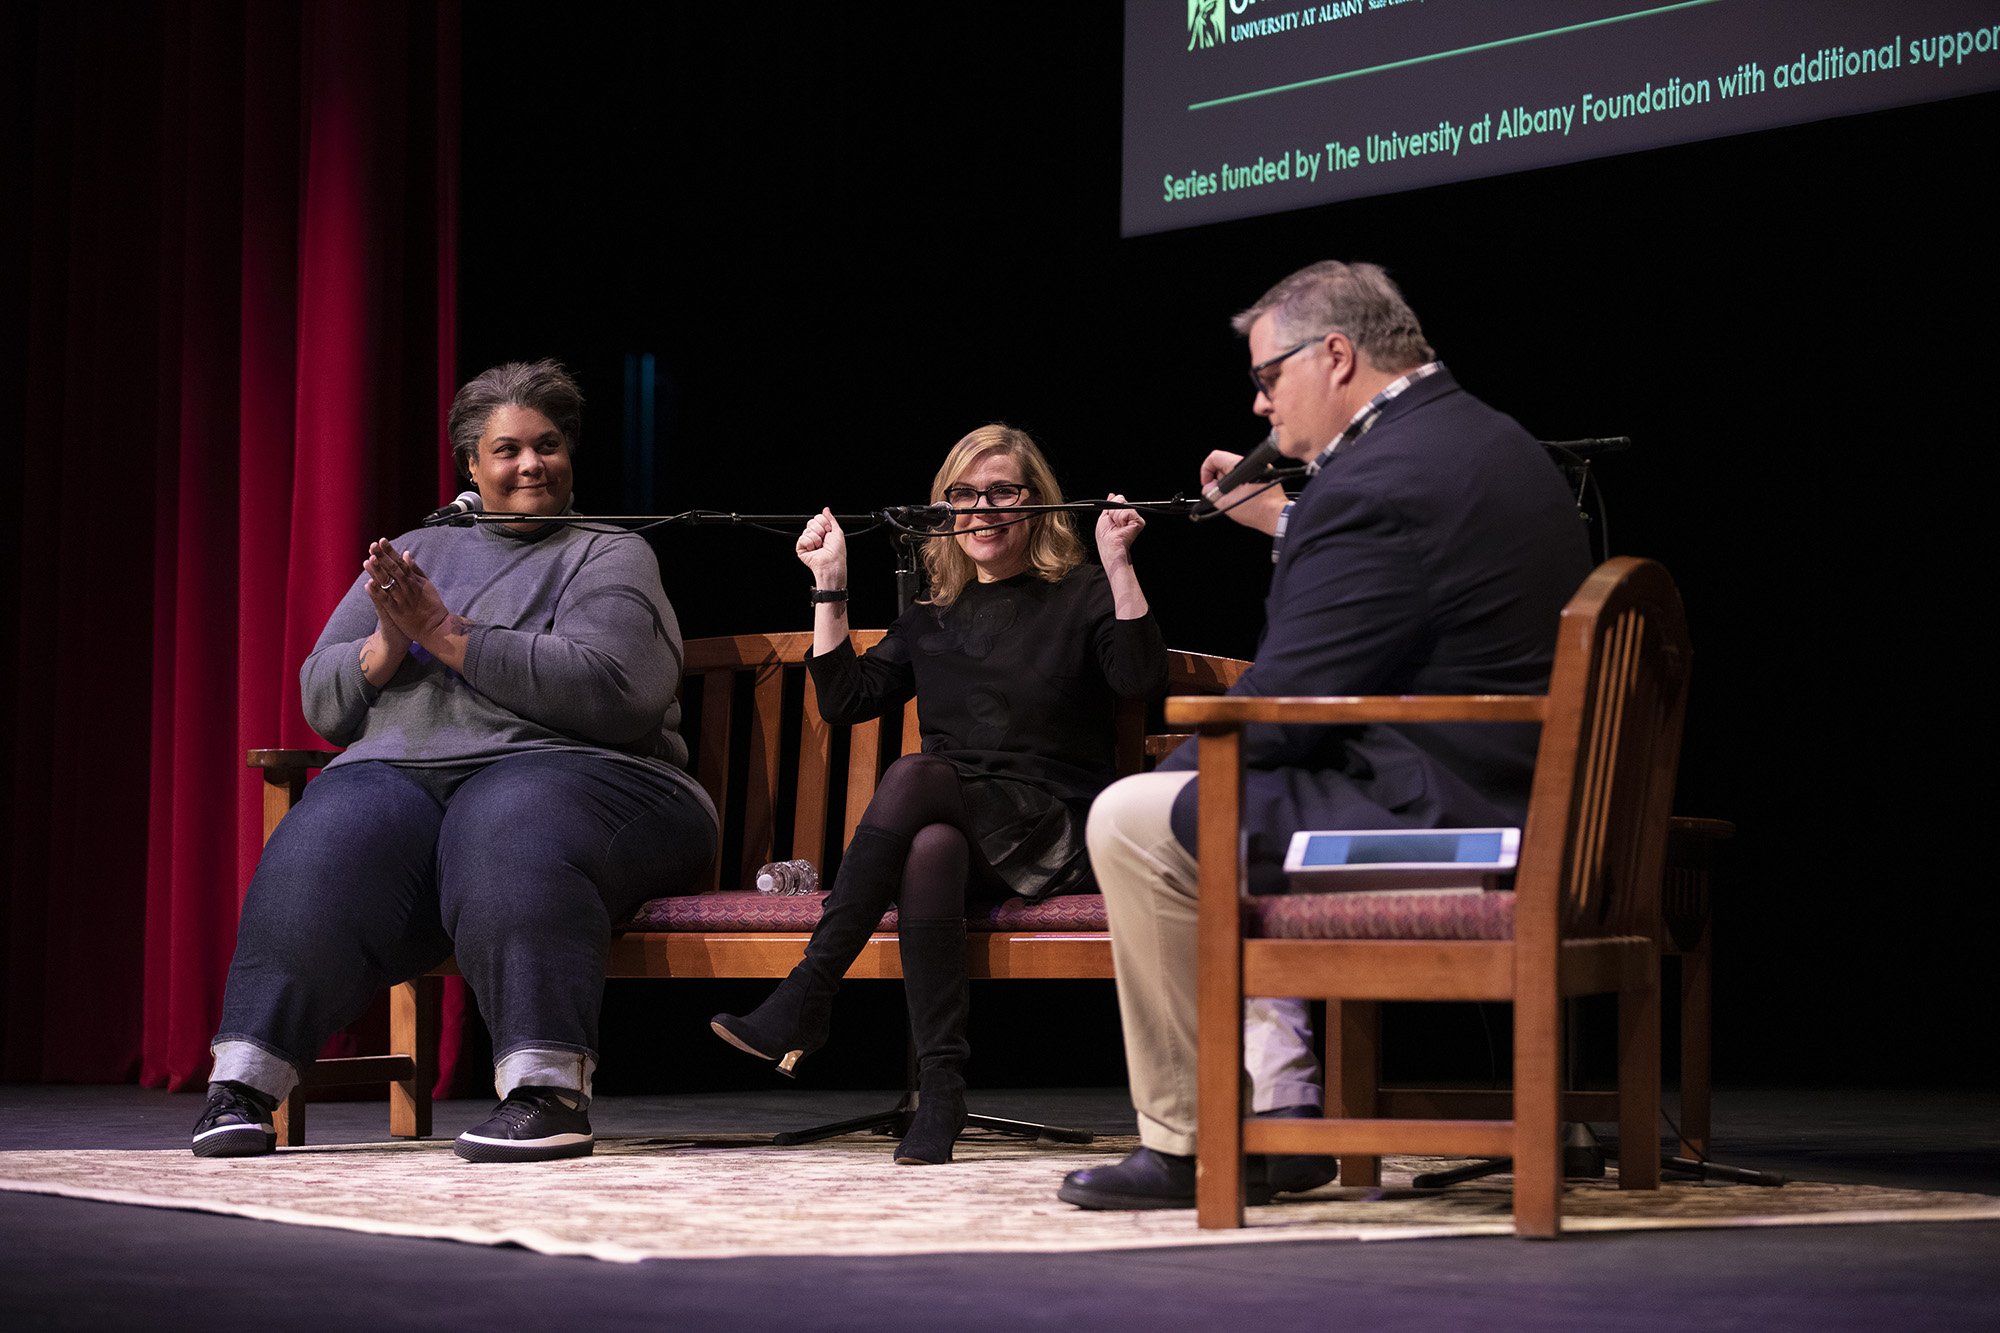  Debbie Millman, Roxane Gay and Joe Donahue in The Creative Life on 11-2-21, photo by Patrick Dodson